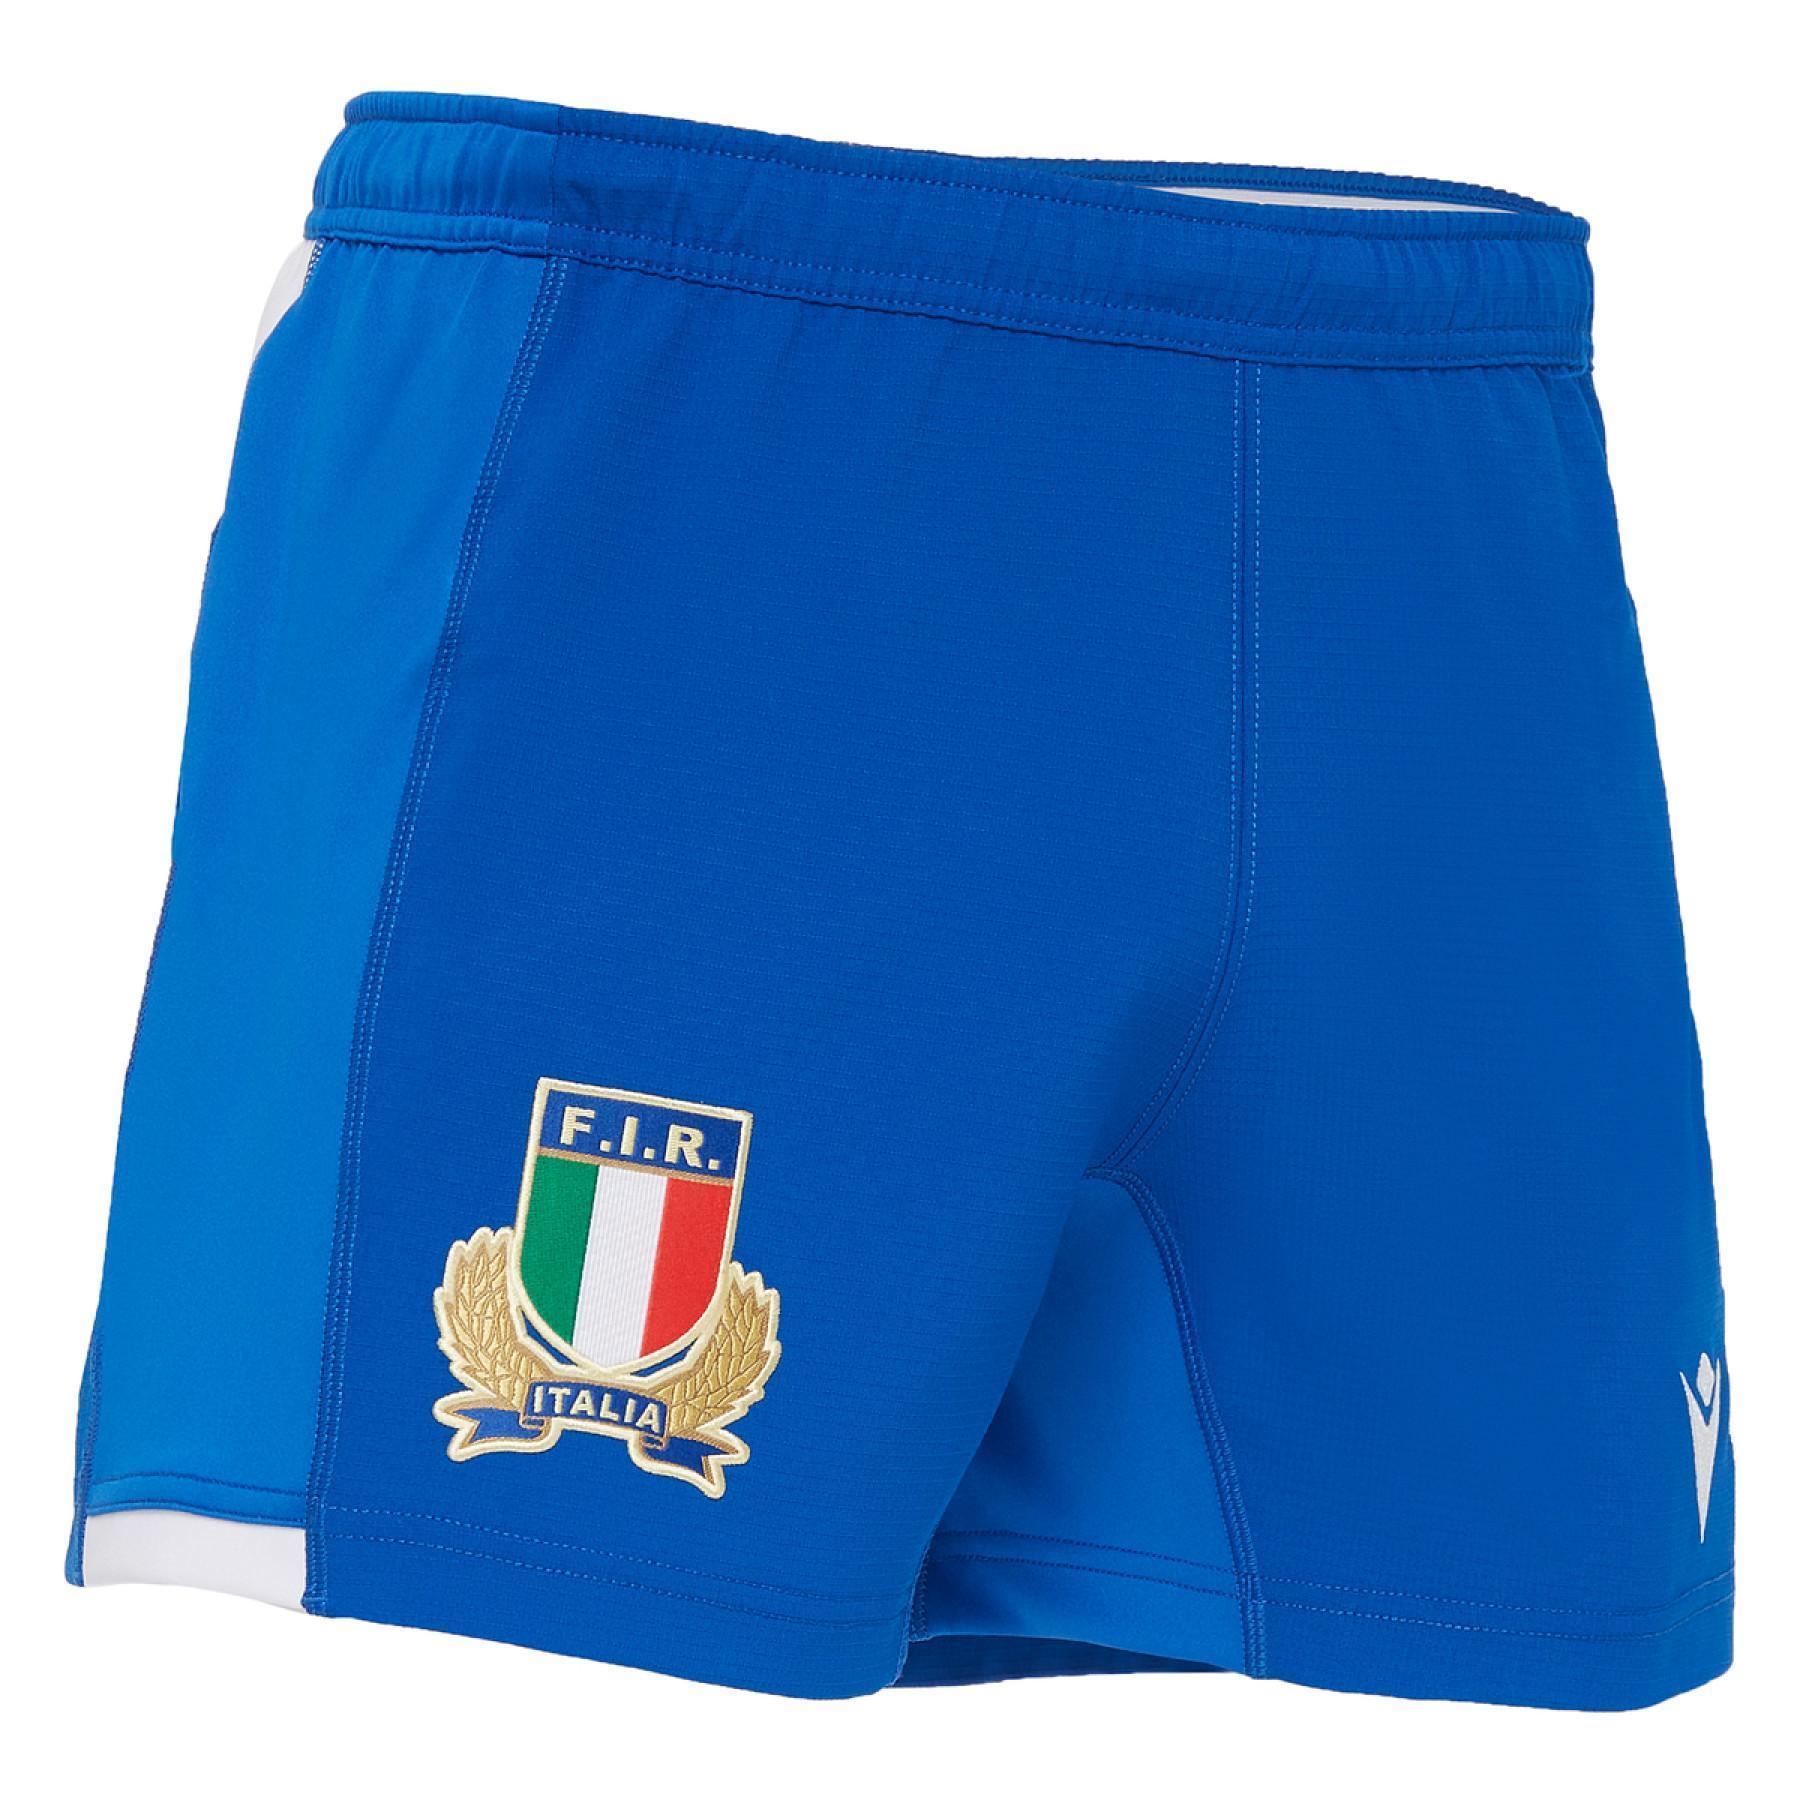 Outdoor shorts competition Italie rugby 2020/21